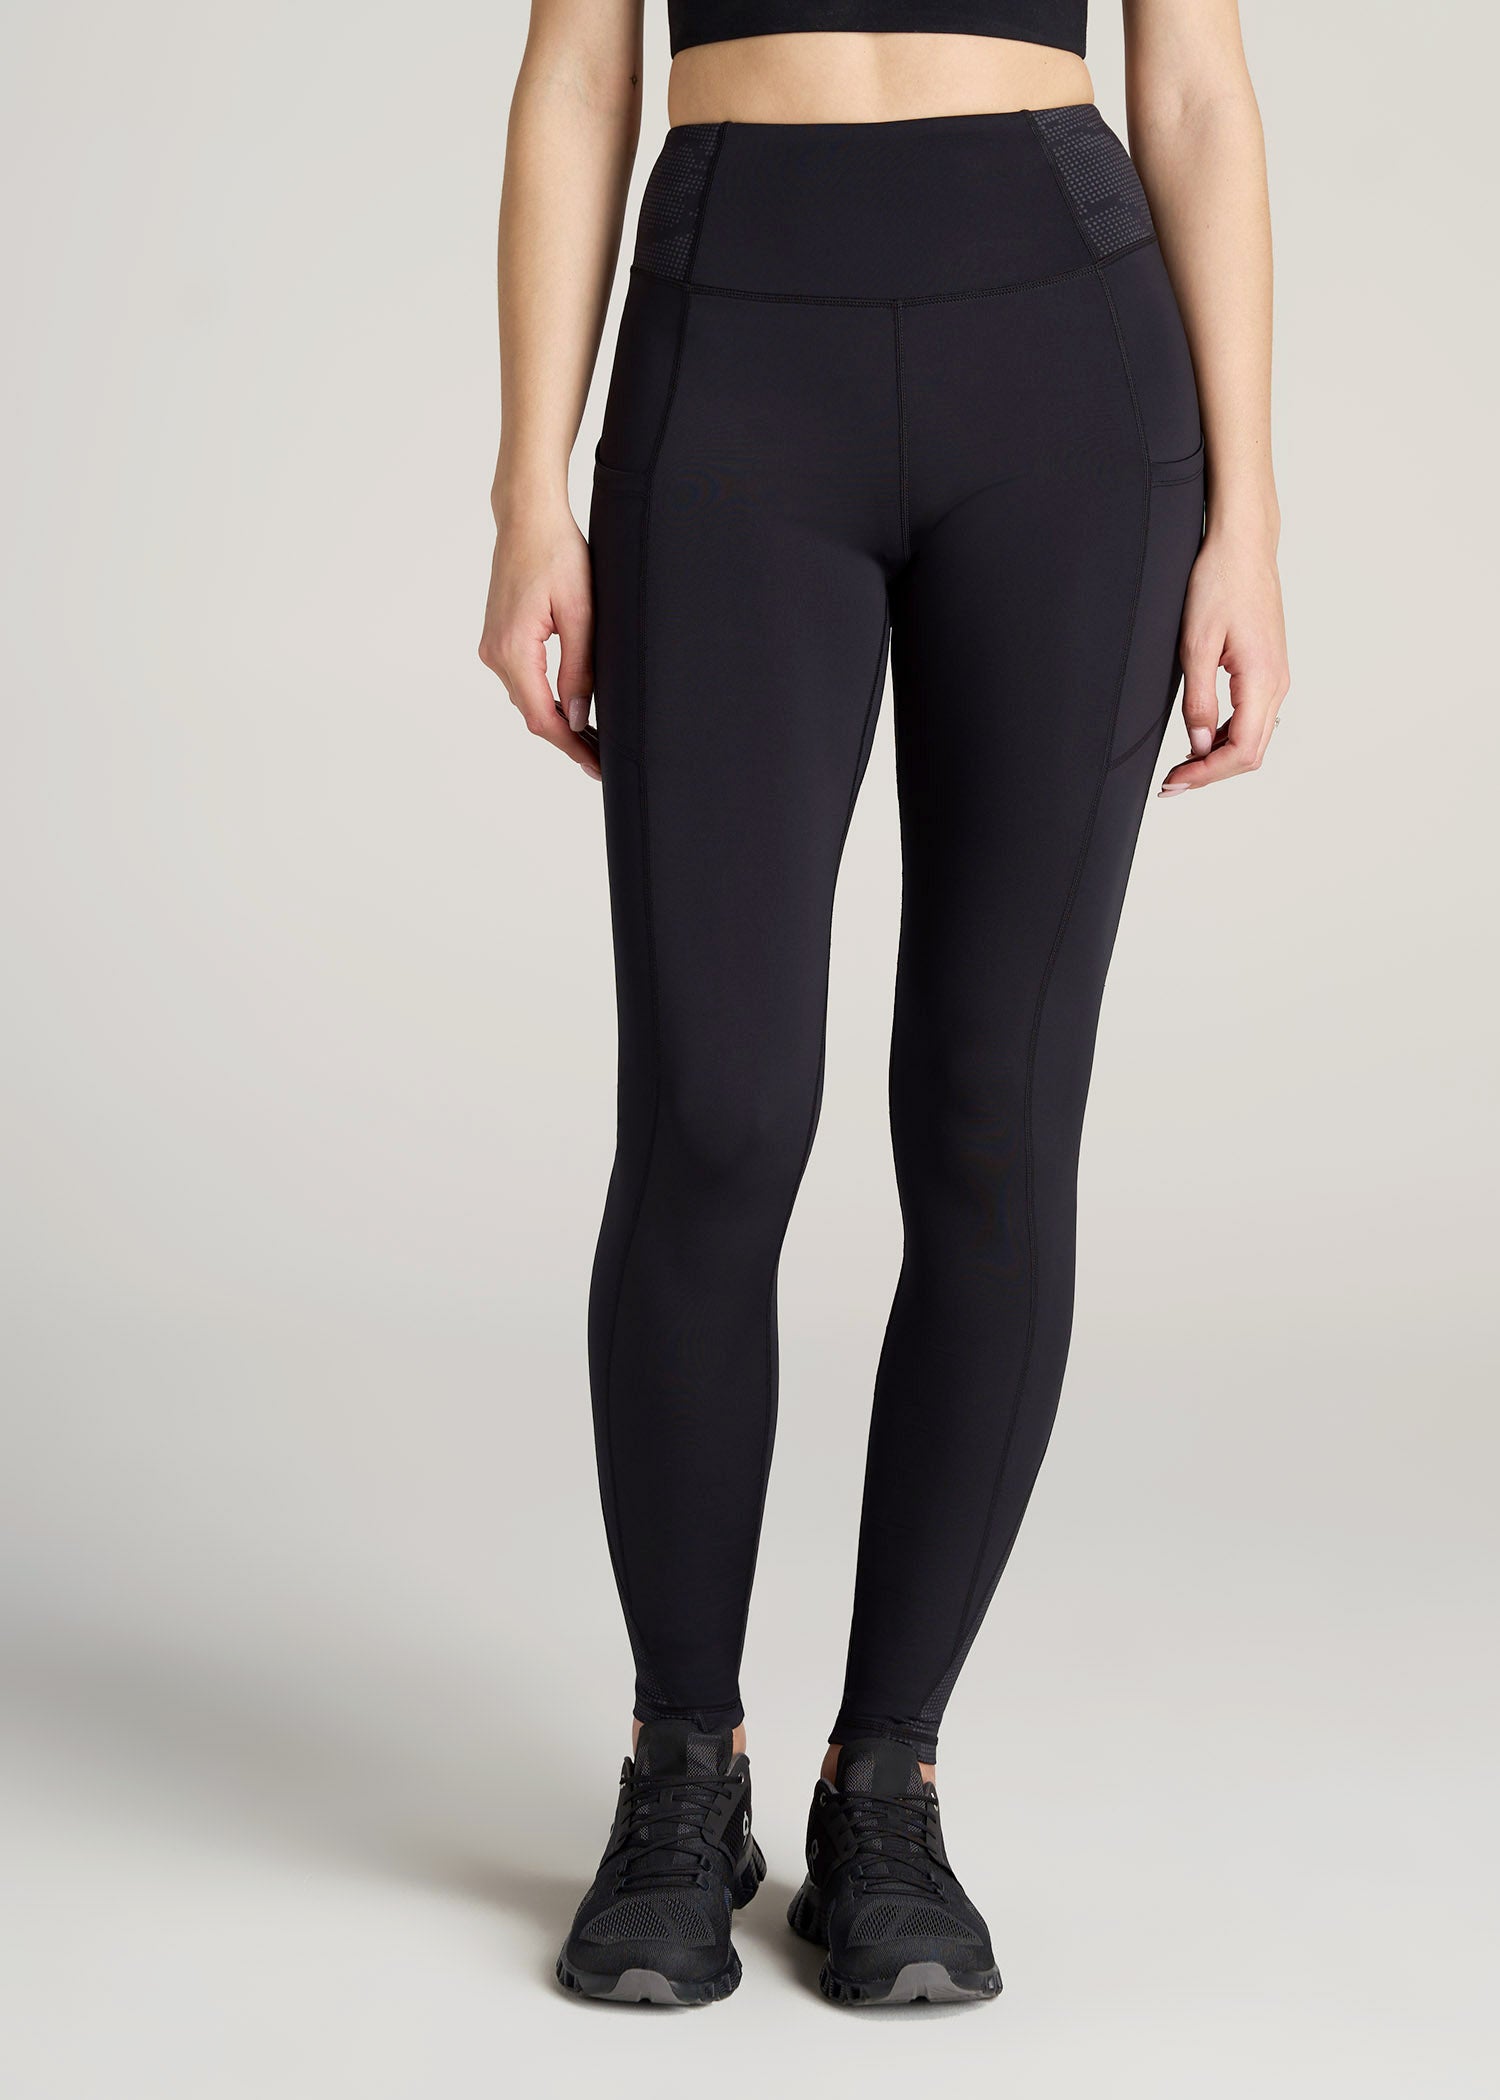 Women's Tall Reflective Active Legging With Pockets Black – American Tall